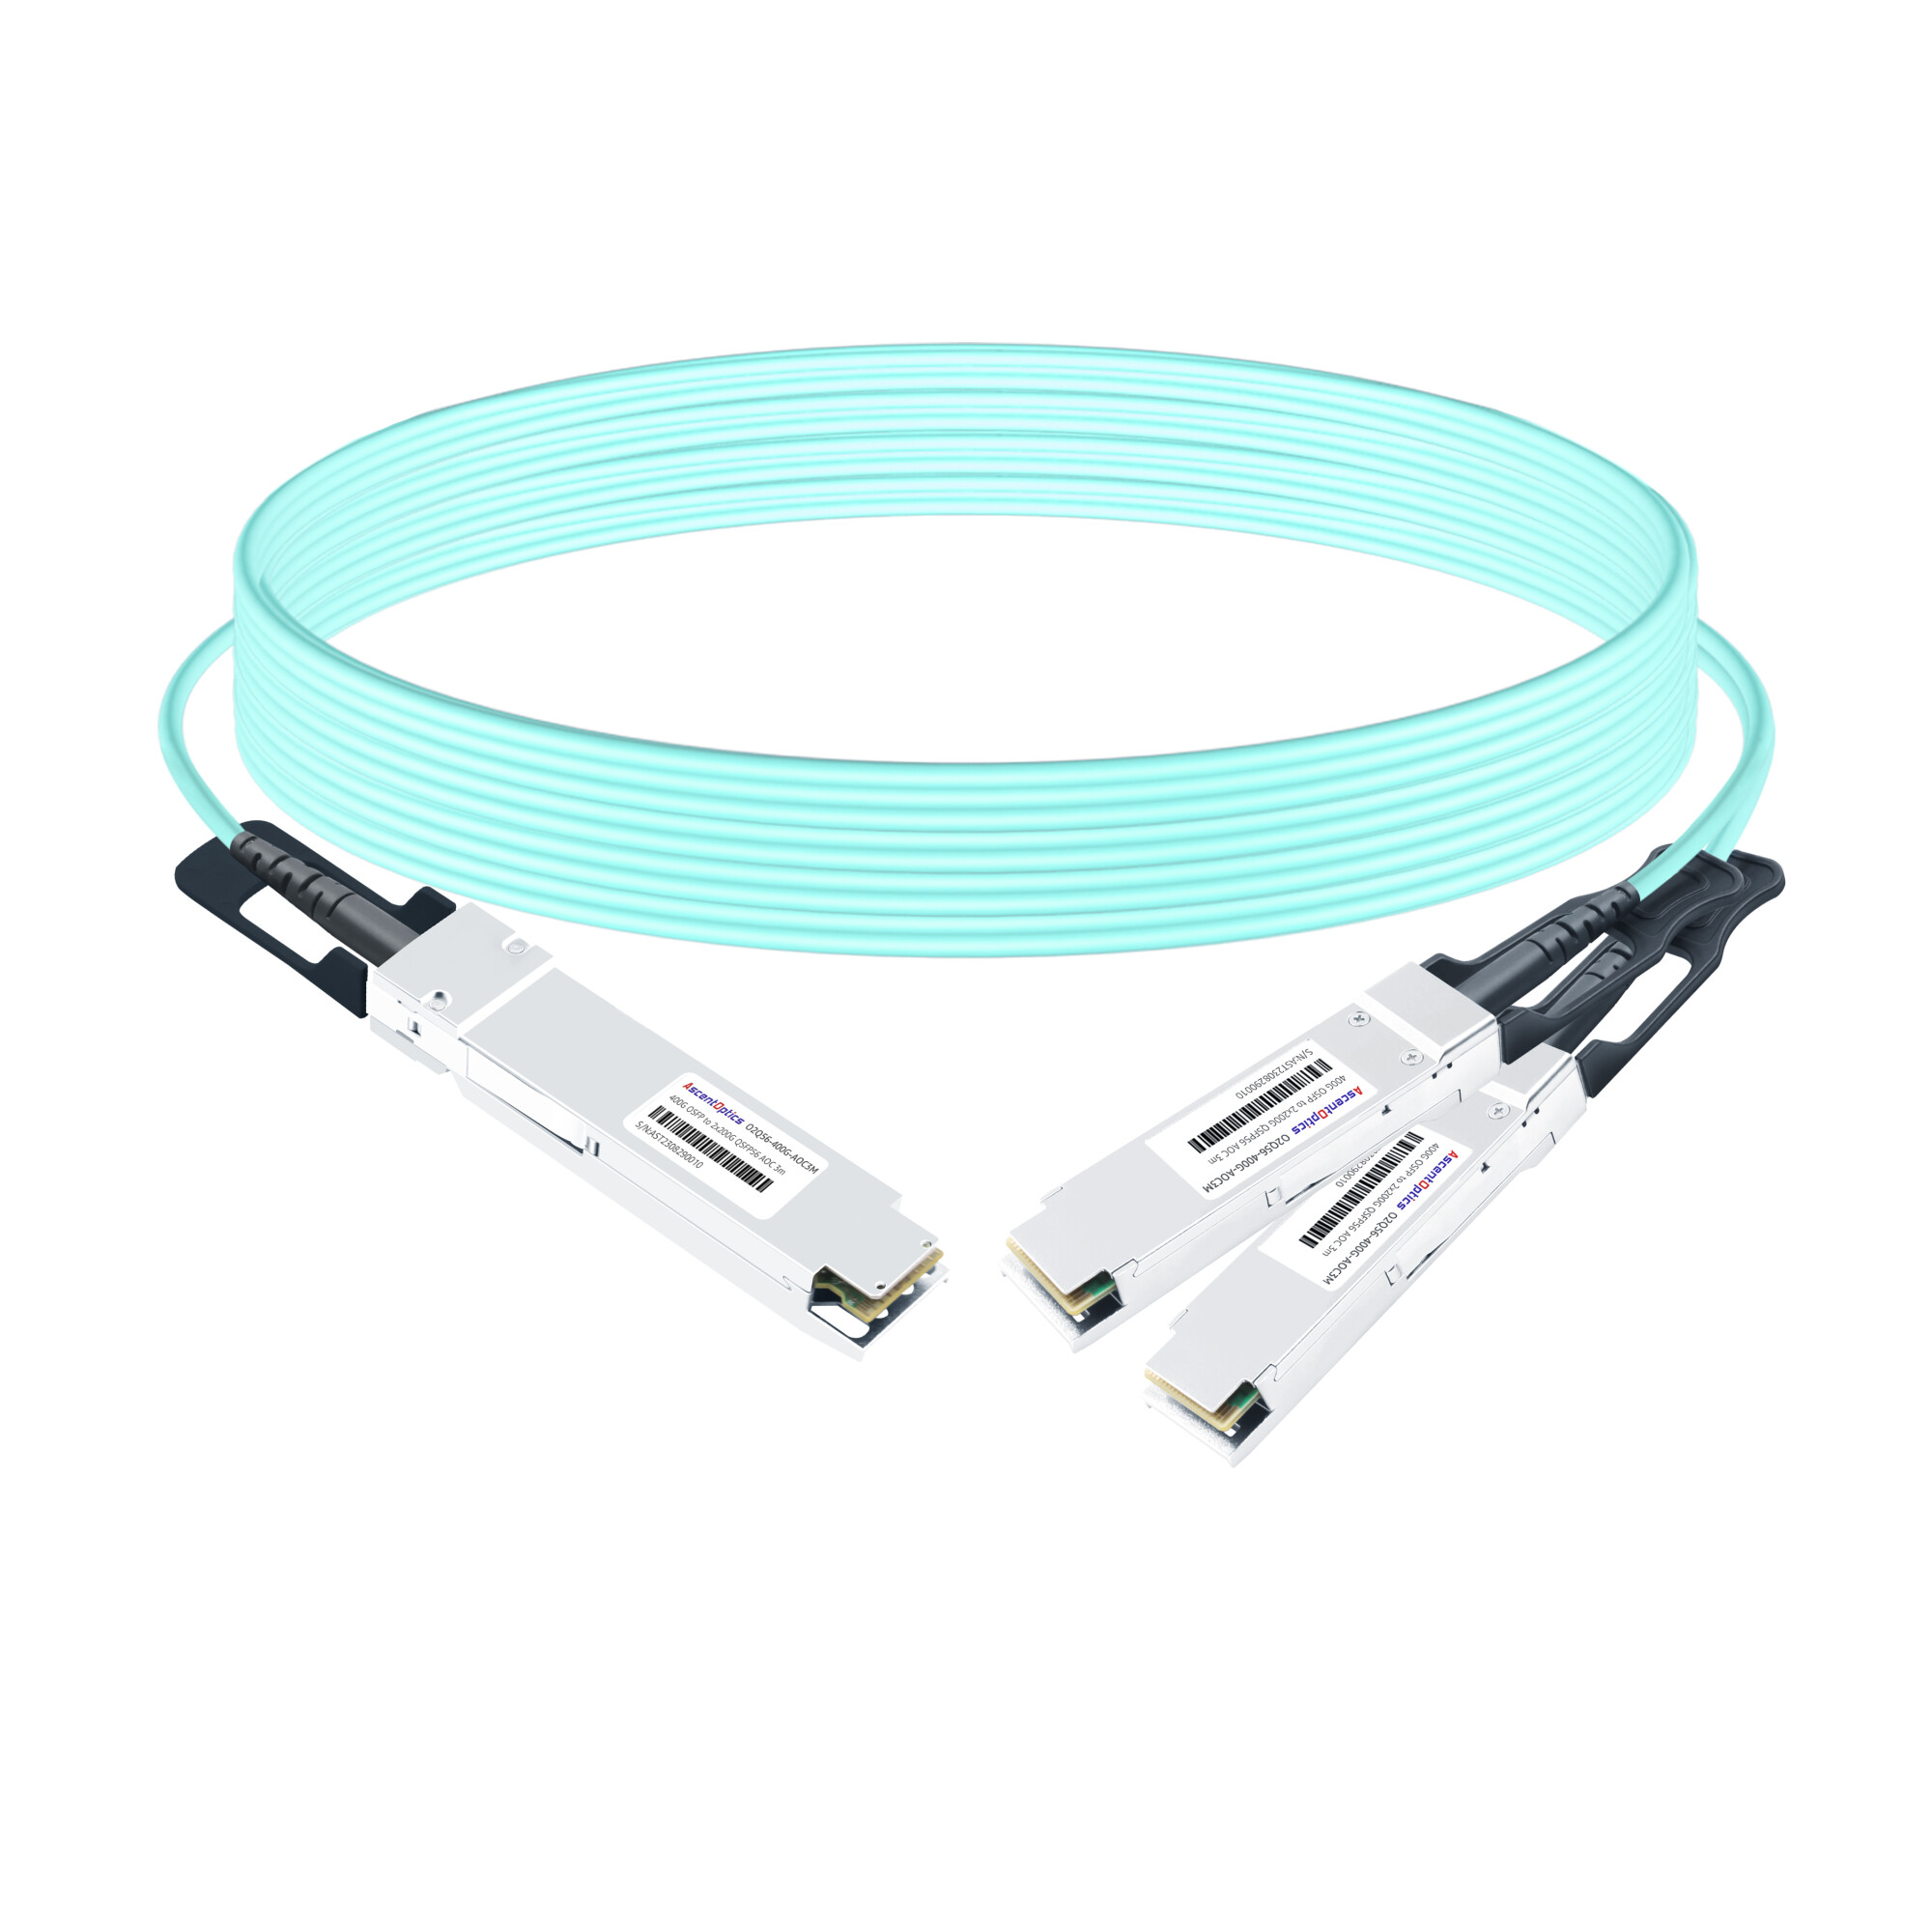 400G OSFP to 2x 200G QSFP56 Breakout Active Optical Cable,3 Meter